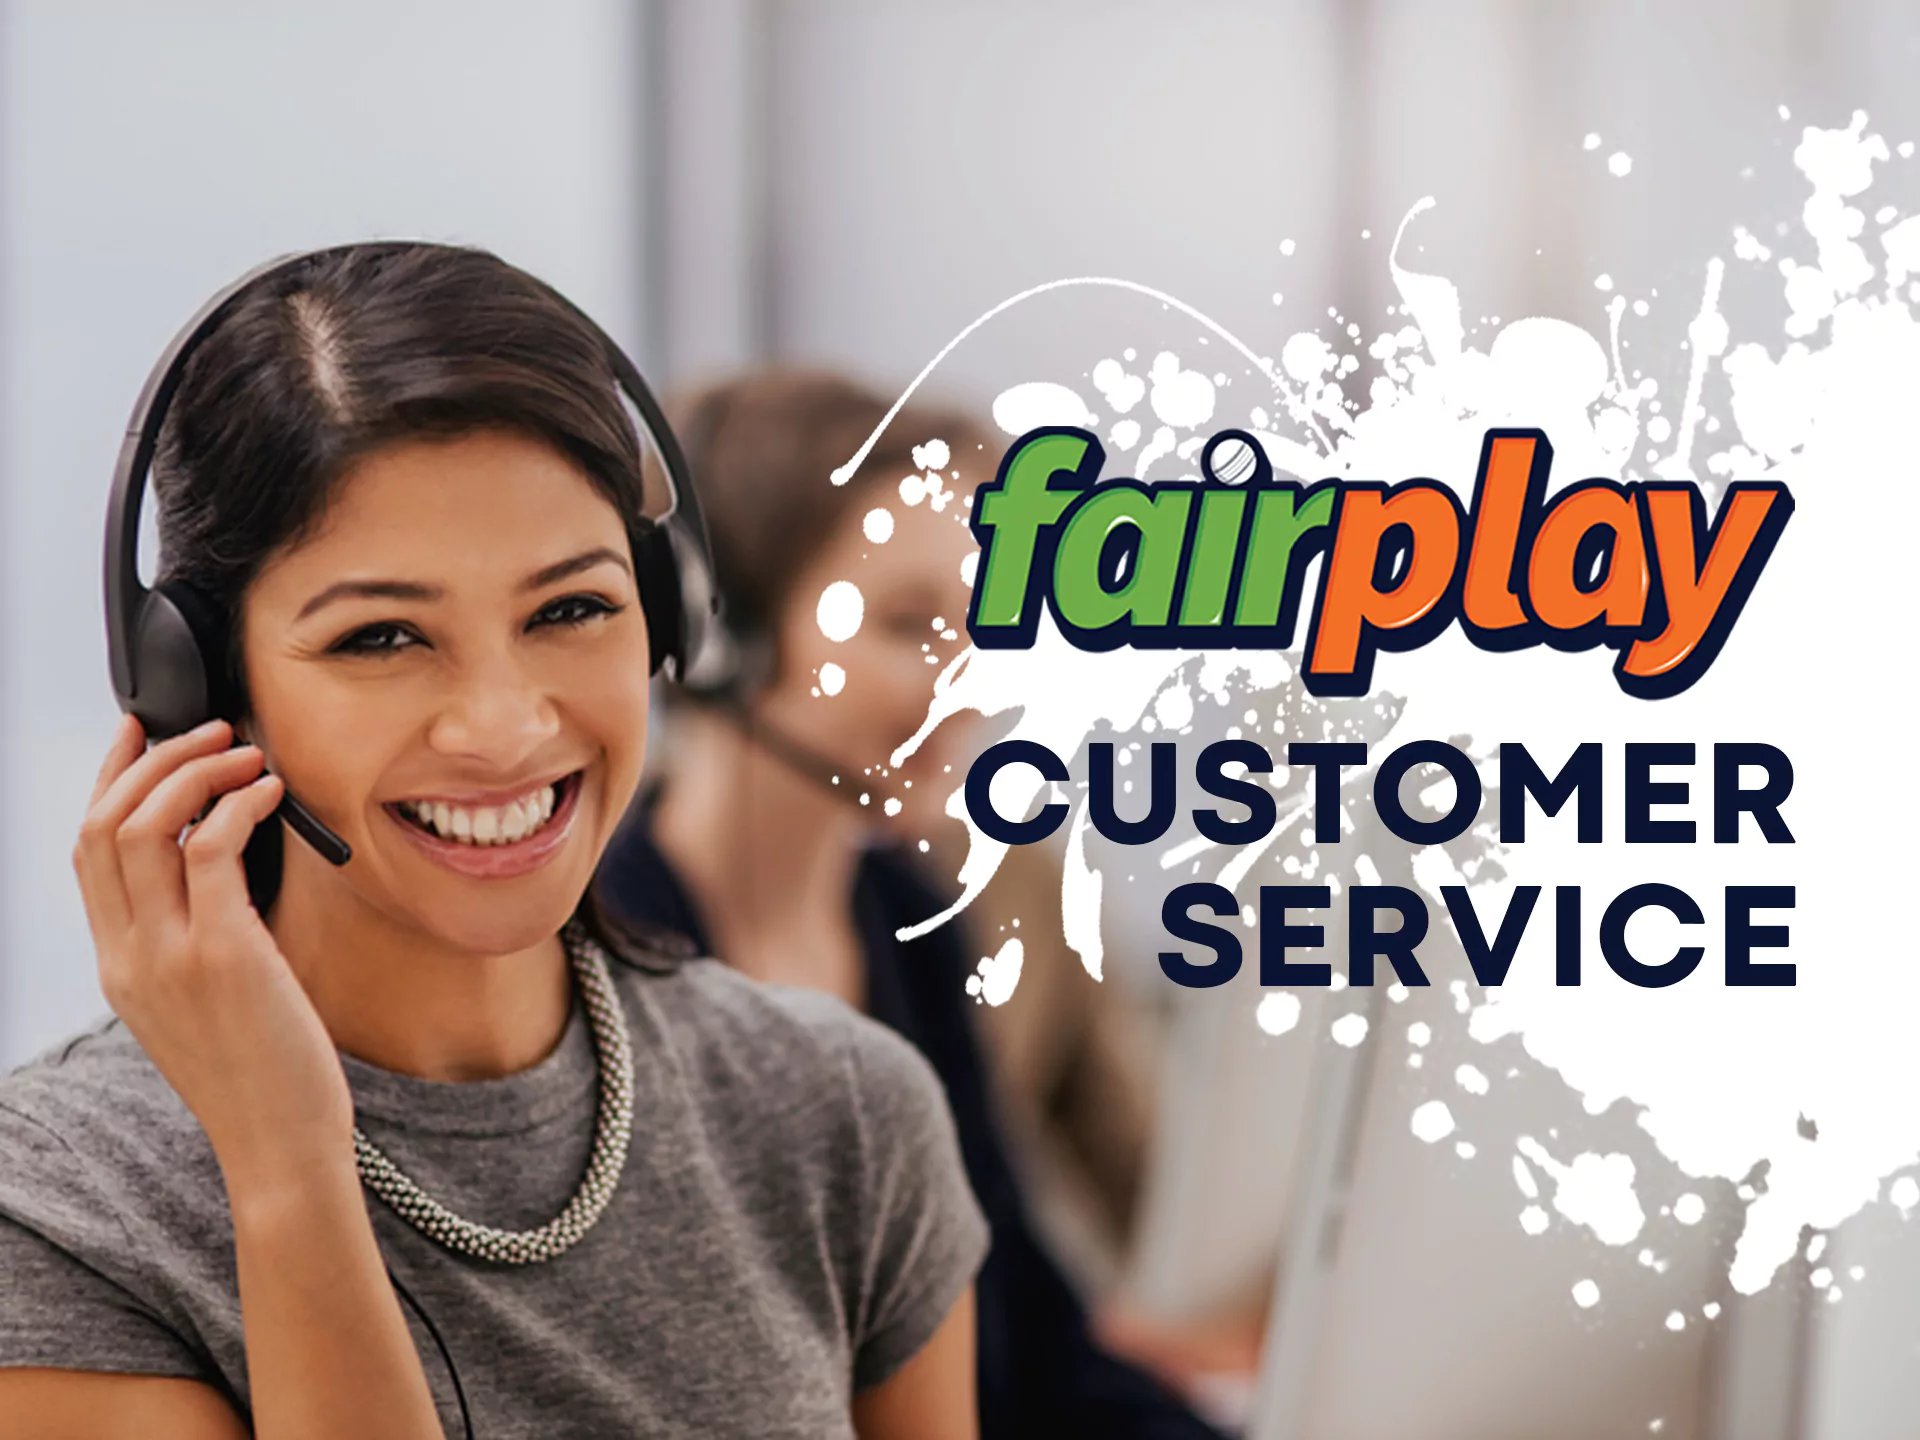 Ask for help at Fairplay.